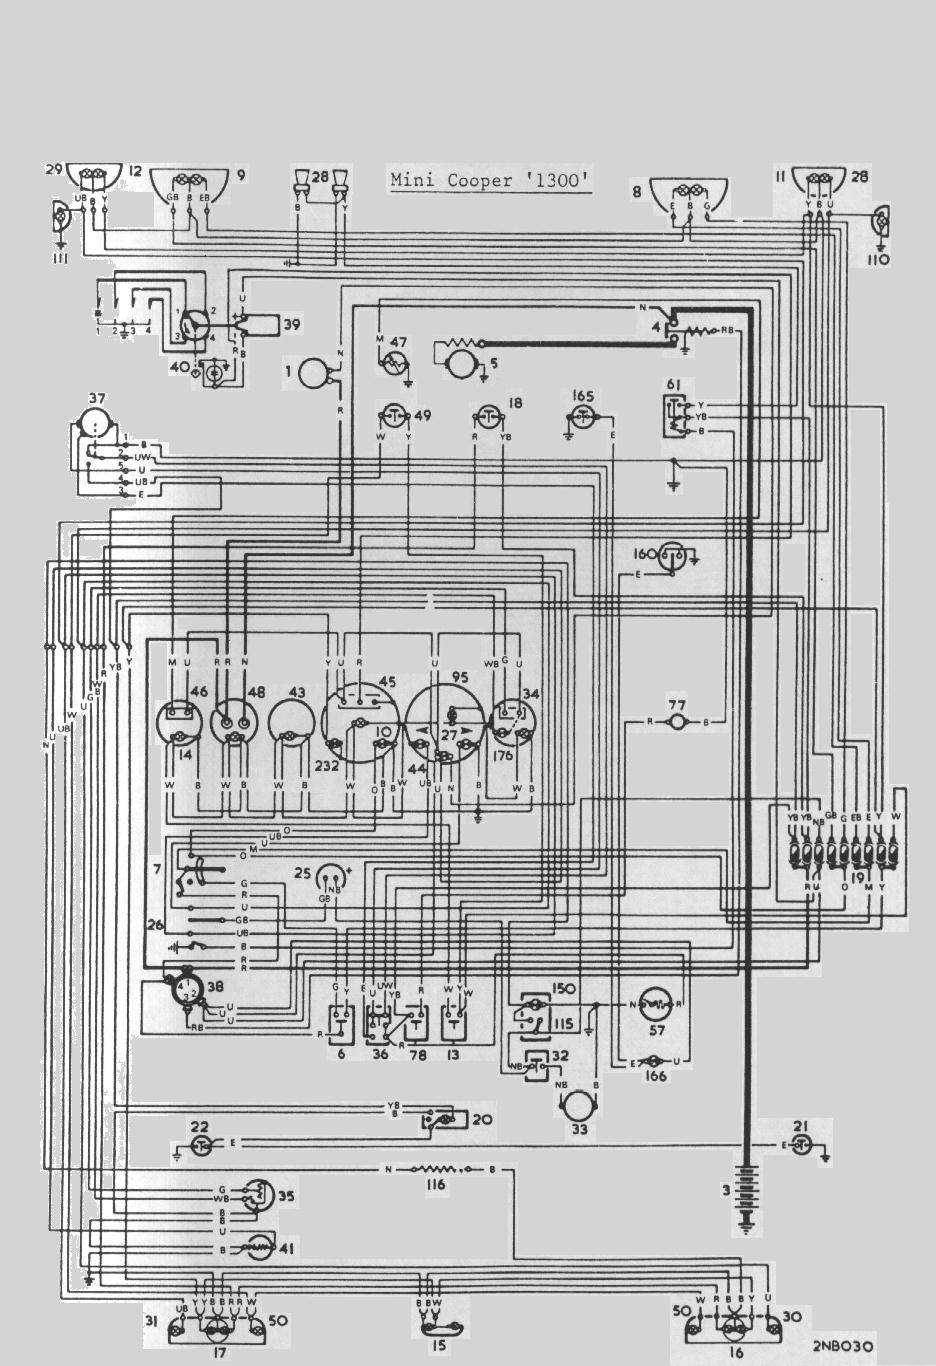 Wiring key and diagrams rocker toggle switch wiring diagram 